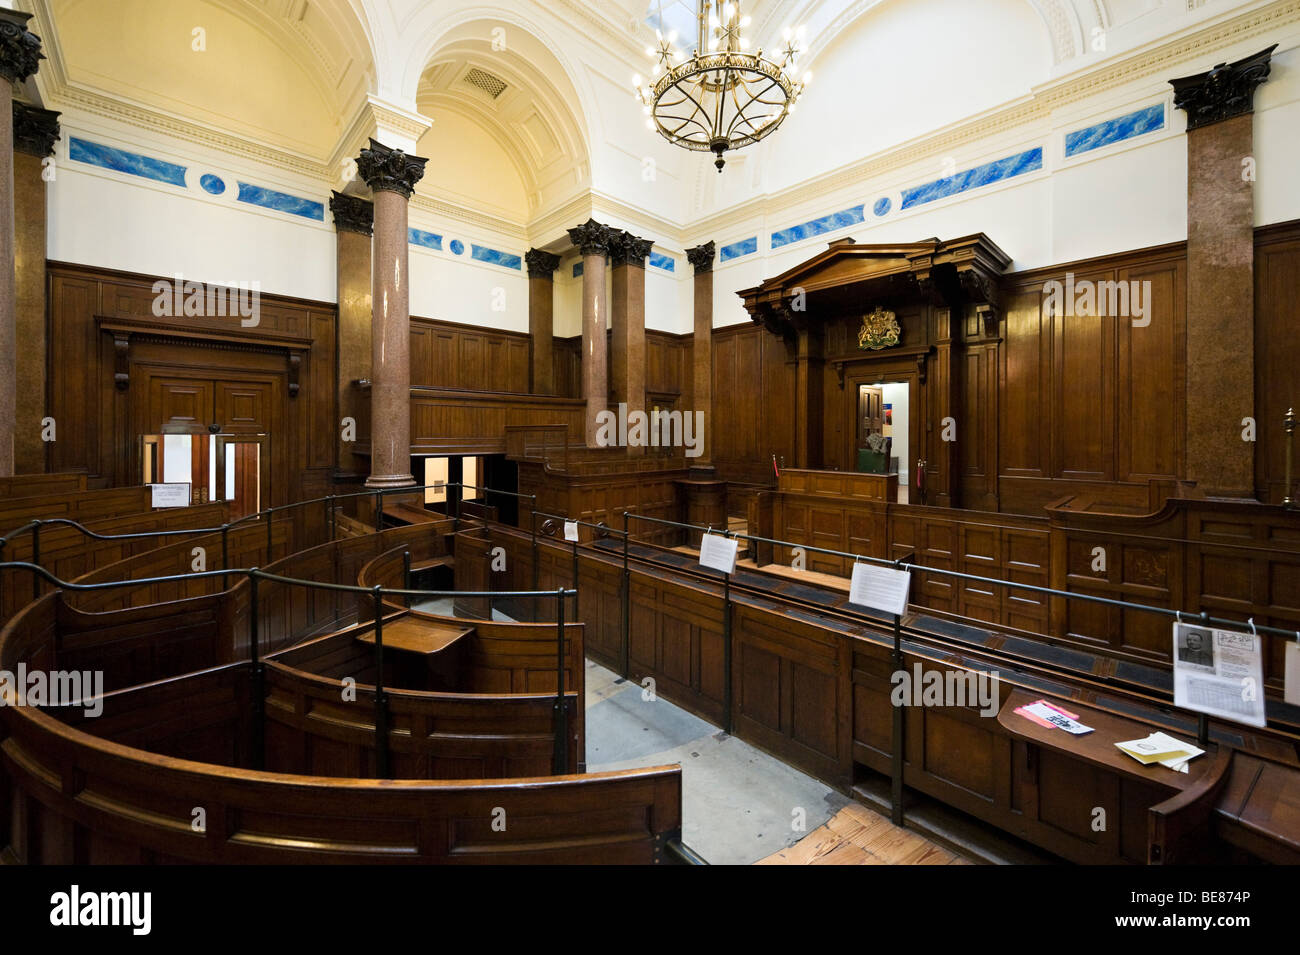 Crown Court Room, St George's Hall, Liverpool, Merseyside, England Stock Photo